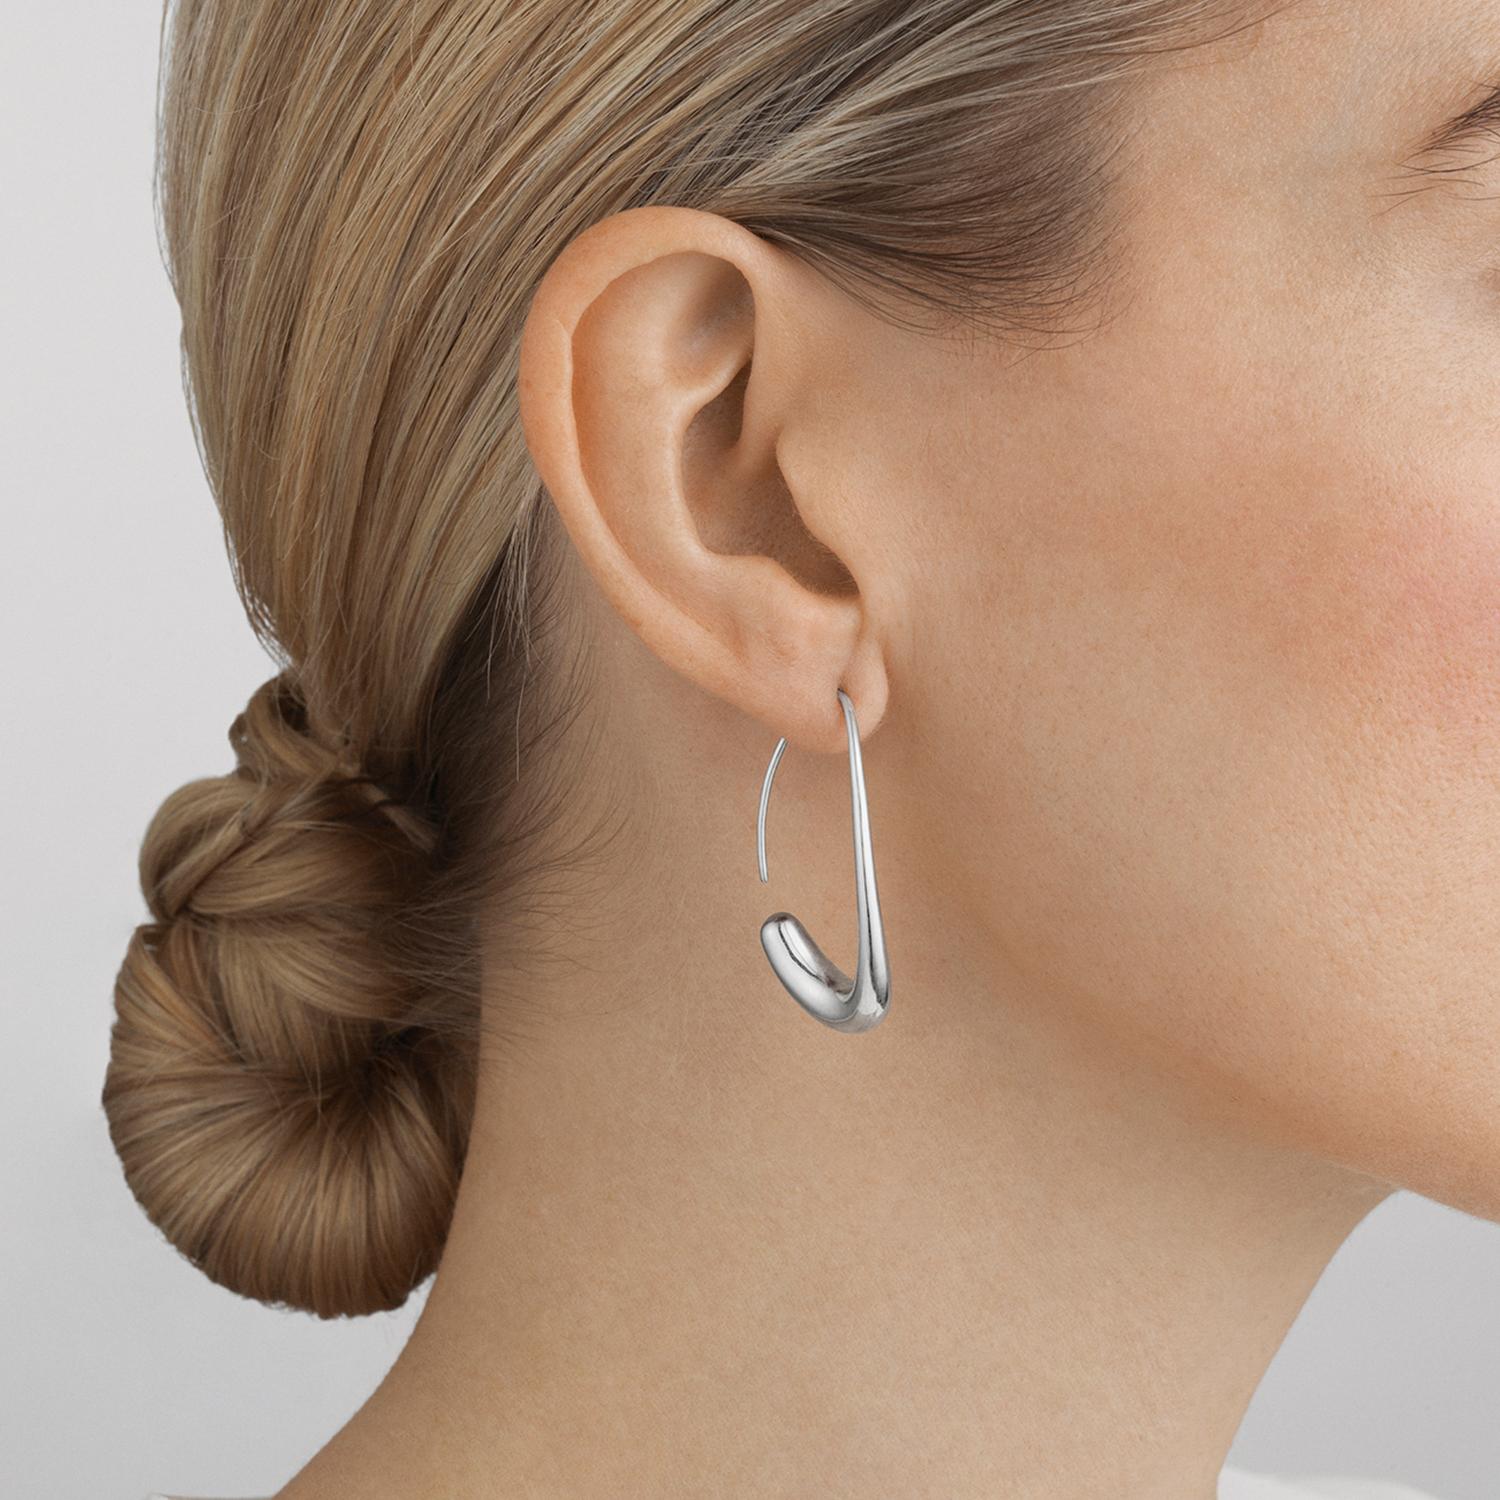 Combining expert craftsmanship with striking design, these sterling silver hoop earrings capture the essence of Scandinavian style. The minimal organic shapes are understated and elegant and reflect the individuality of the wearer in a sophisticated